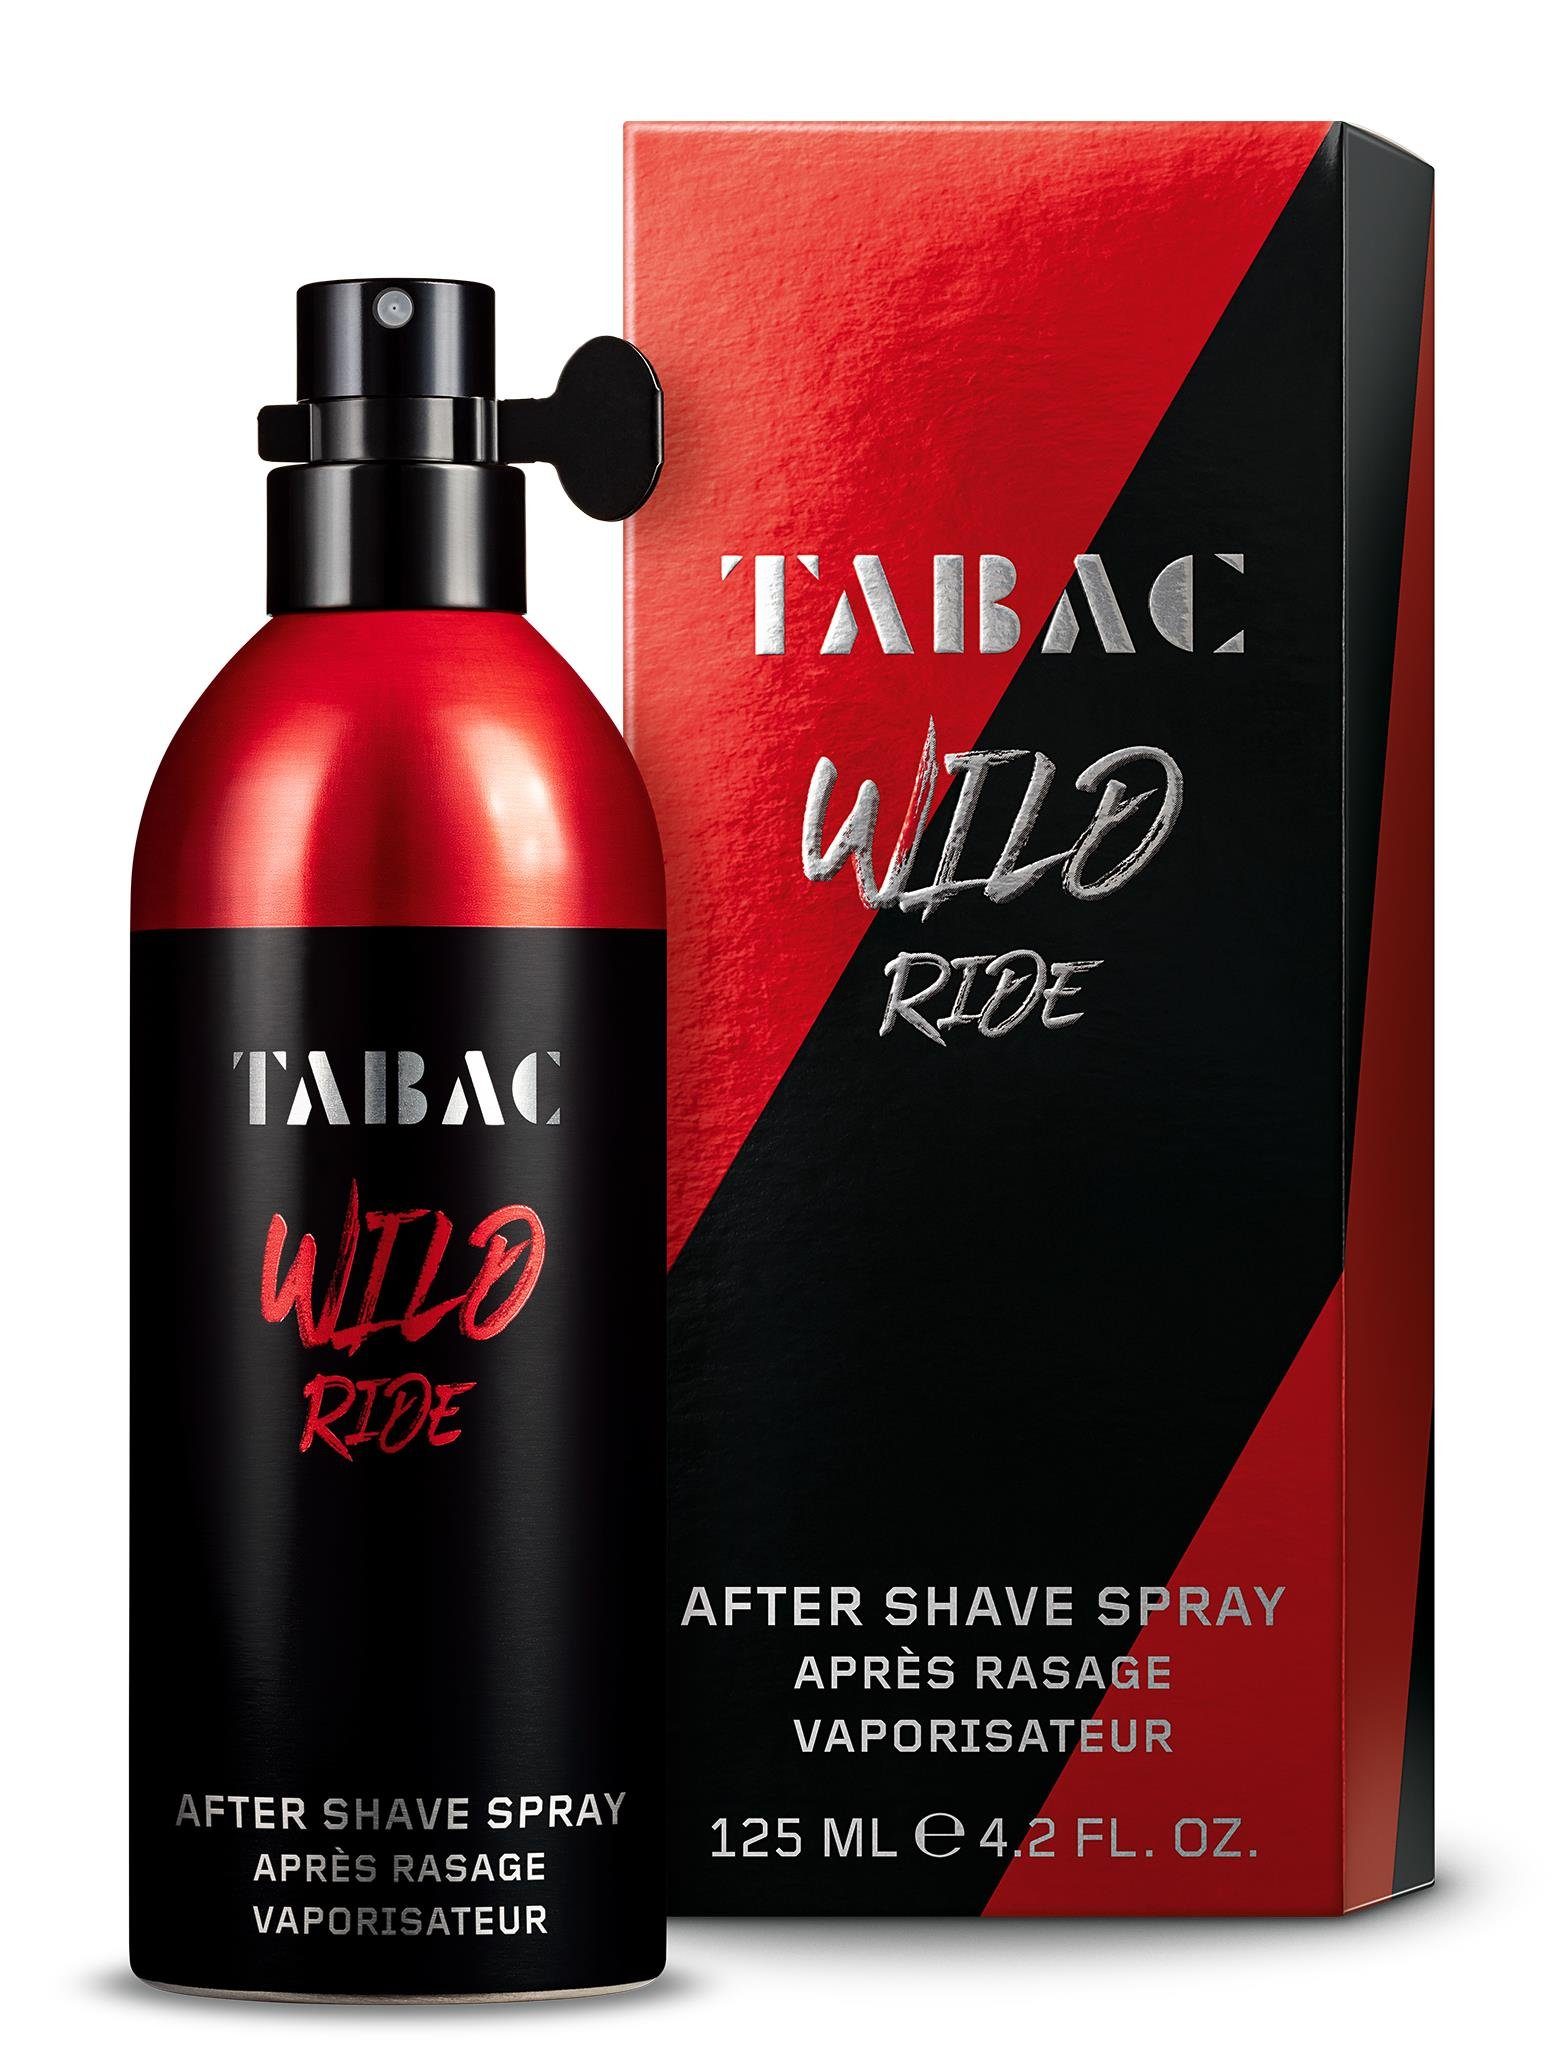 Lotion Tabac After Ride Ride Wild ml Shave Gesichts-Reinigungslotion 125 Tabac Wild